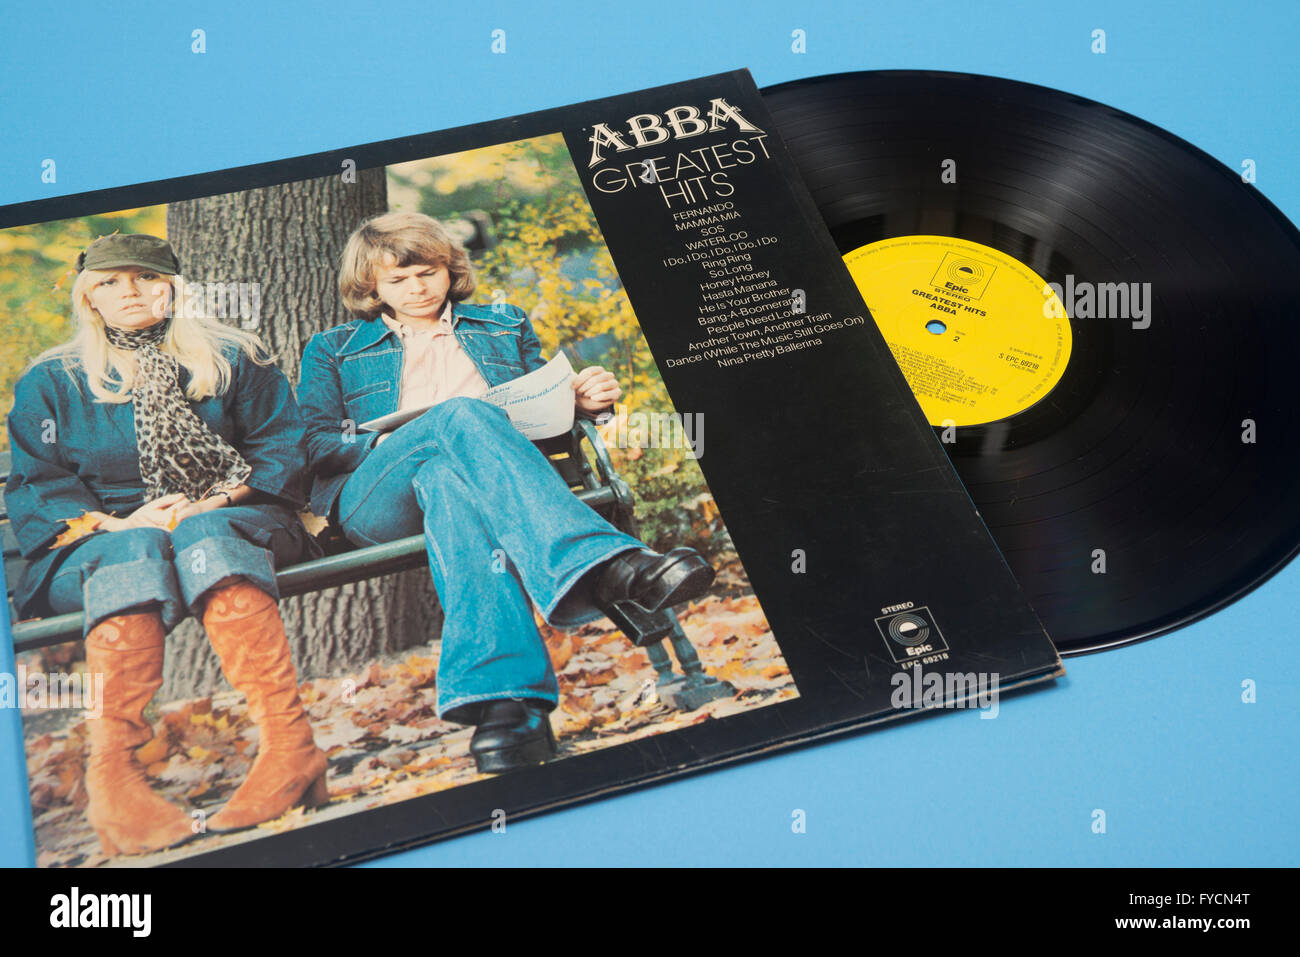 Greatest Hits album on vinyl by Abba with original sleeve artwork Stock Photo